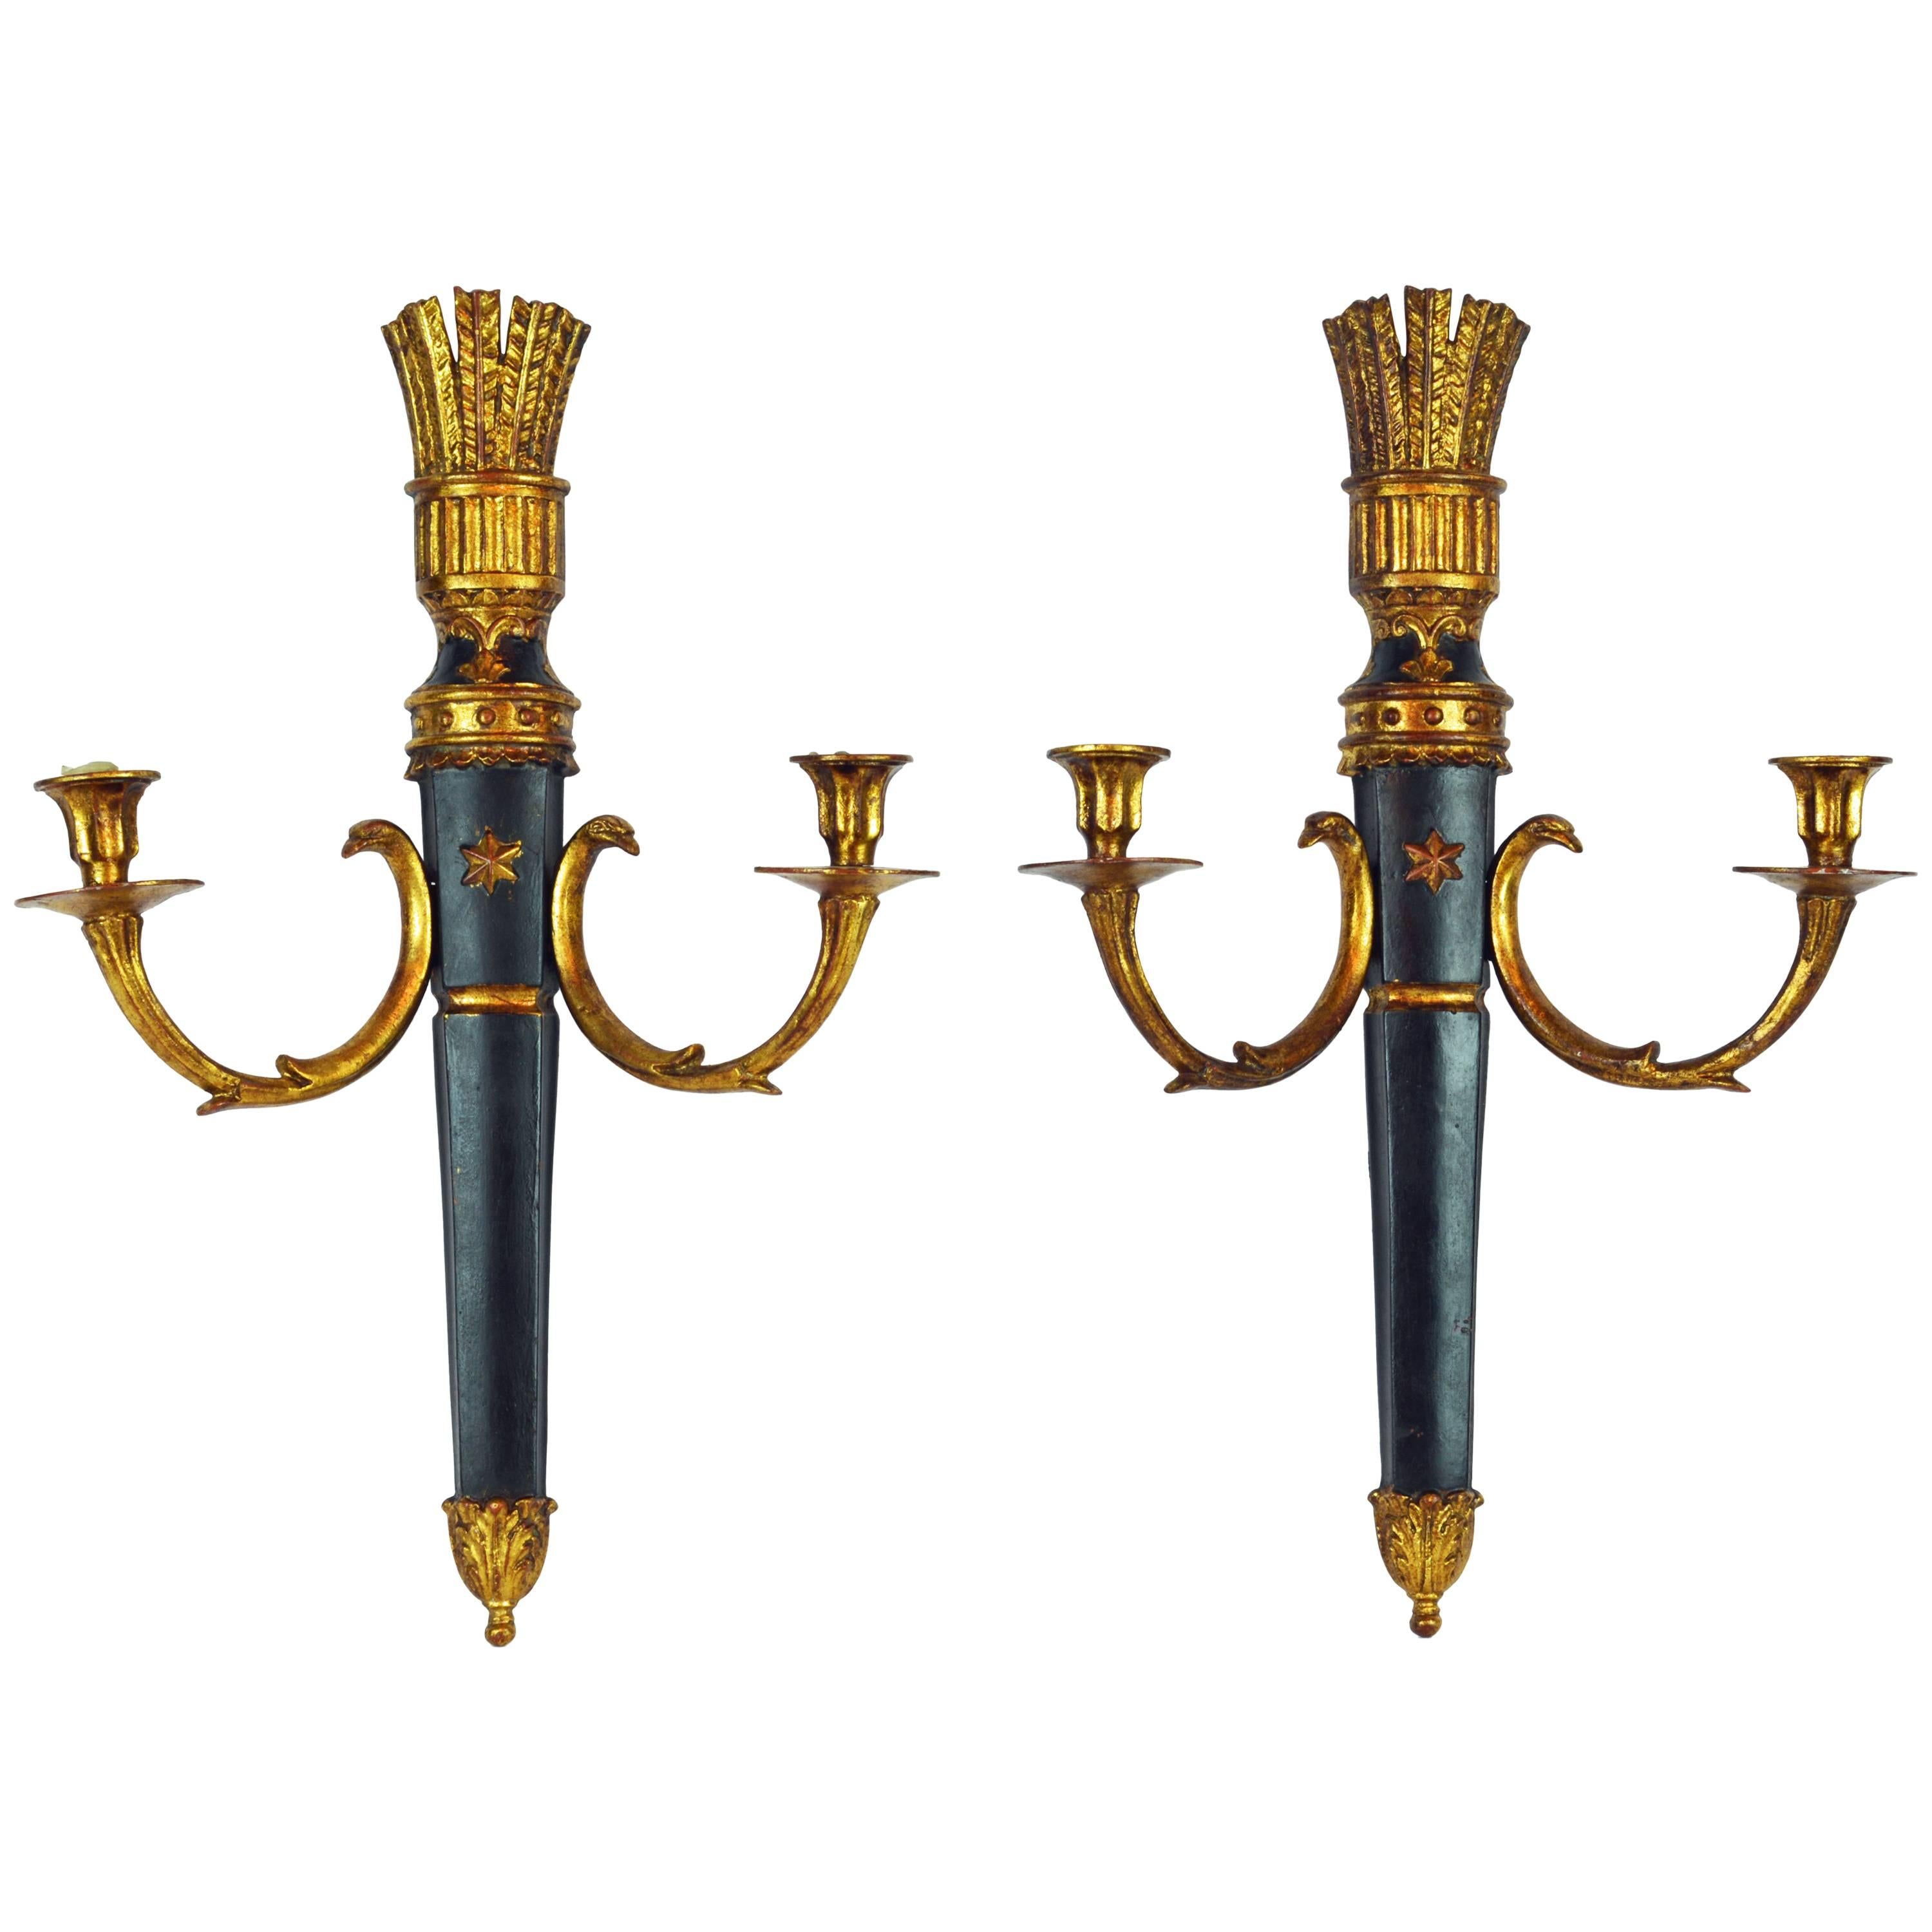 Pair of Italian Neoclassical Style Quiver Themed Gilt Wall Sconces by Palladio